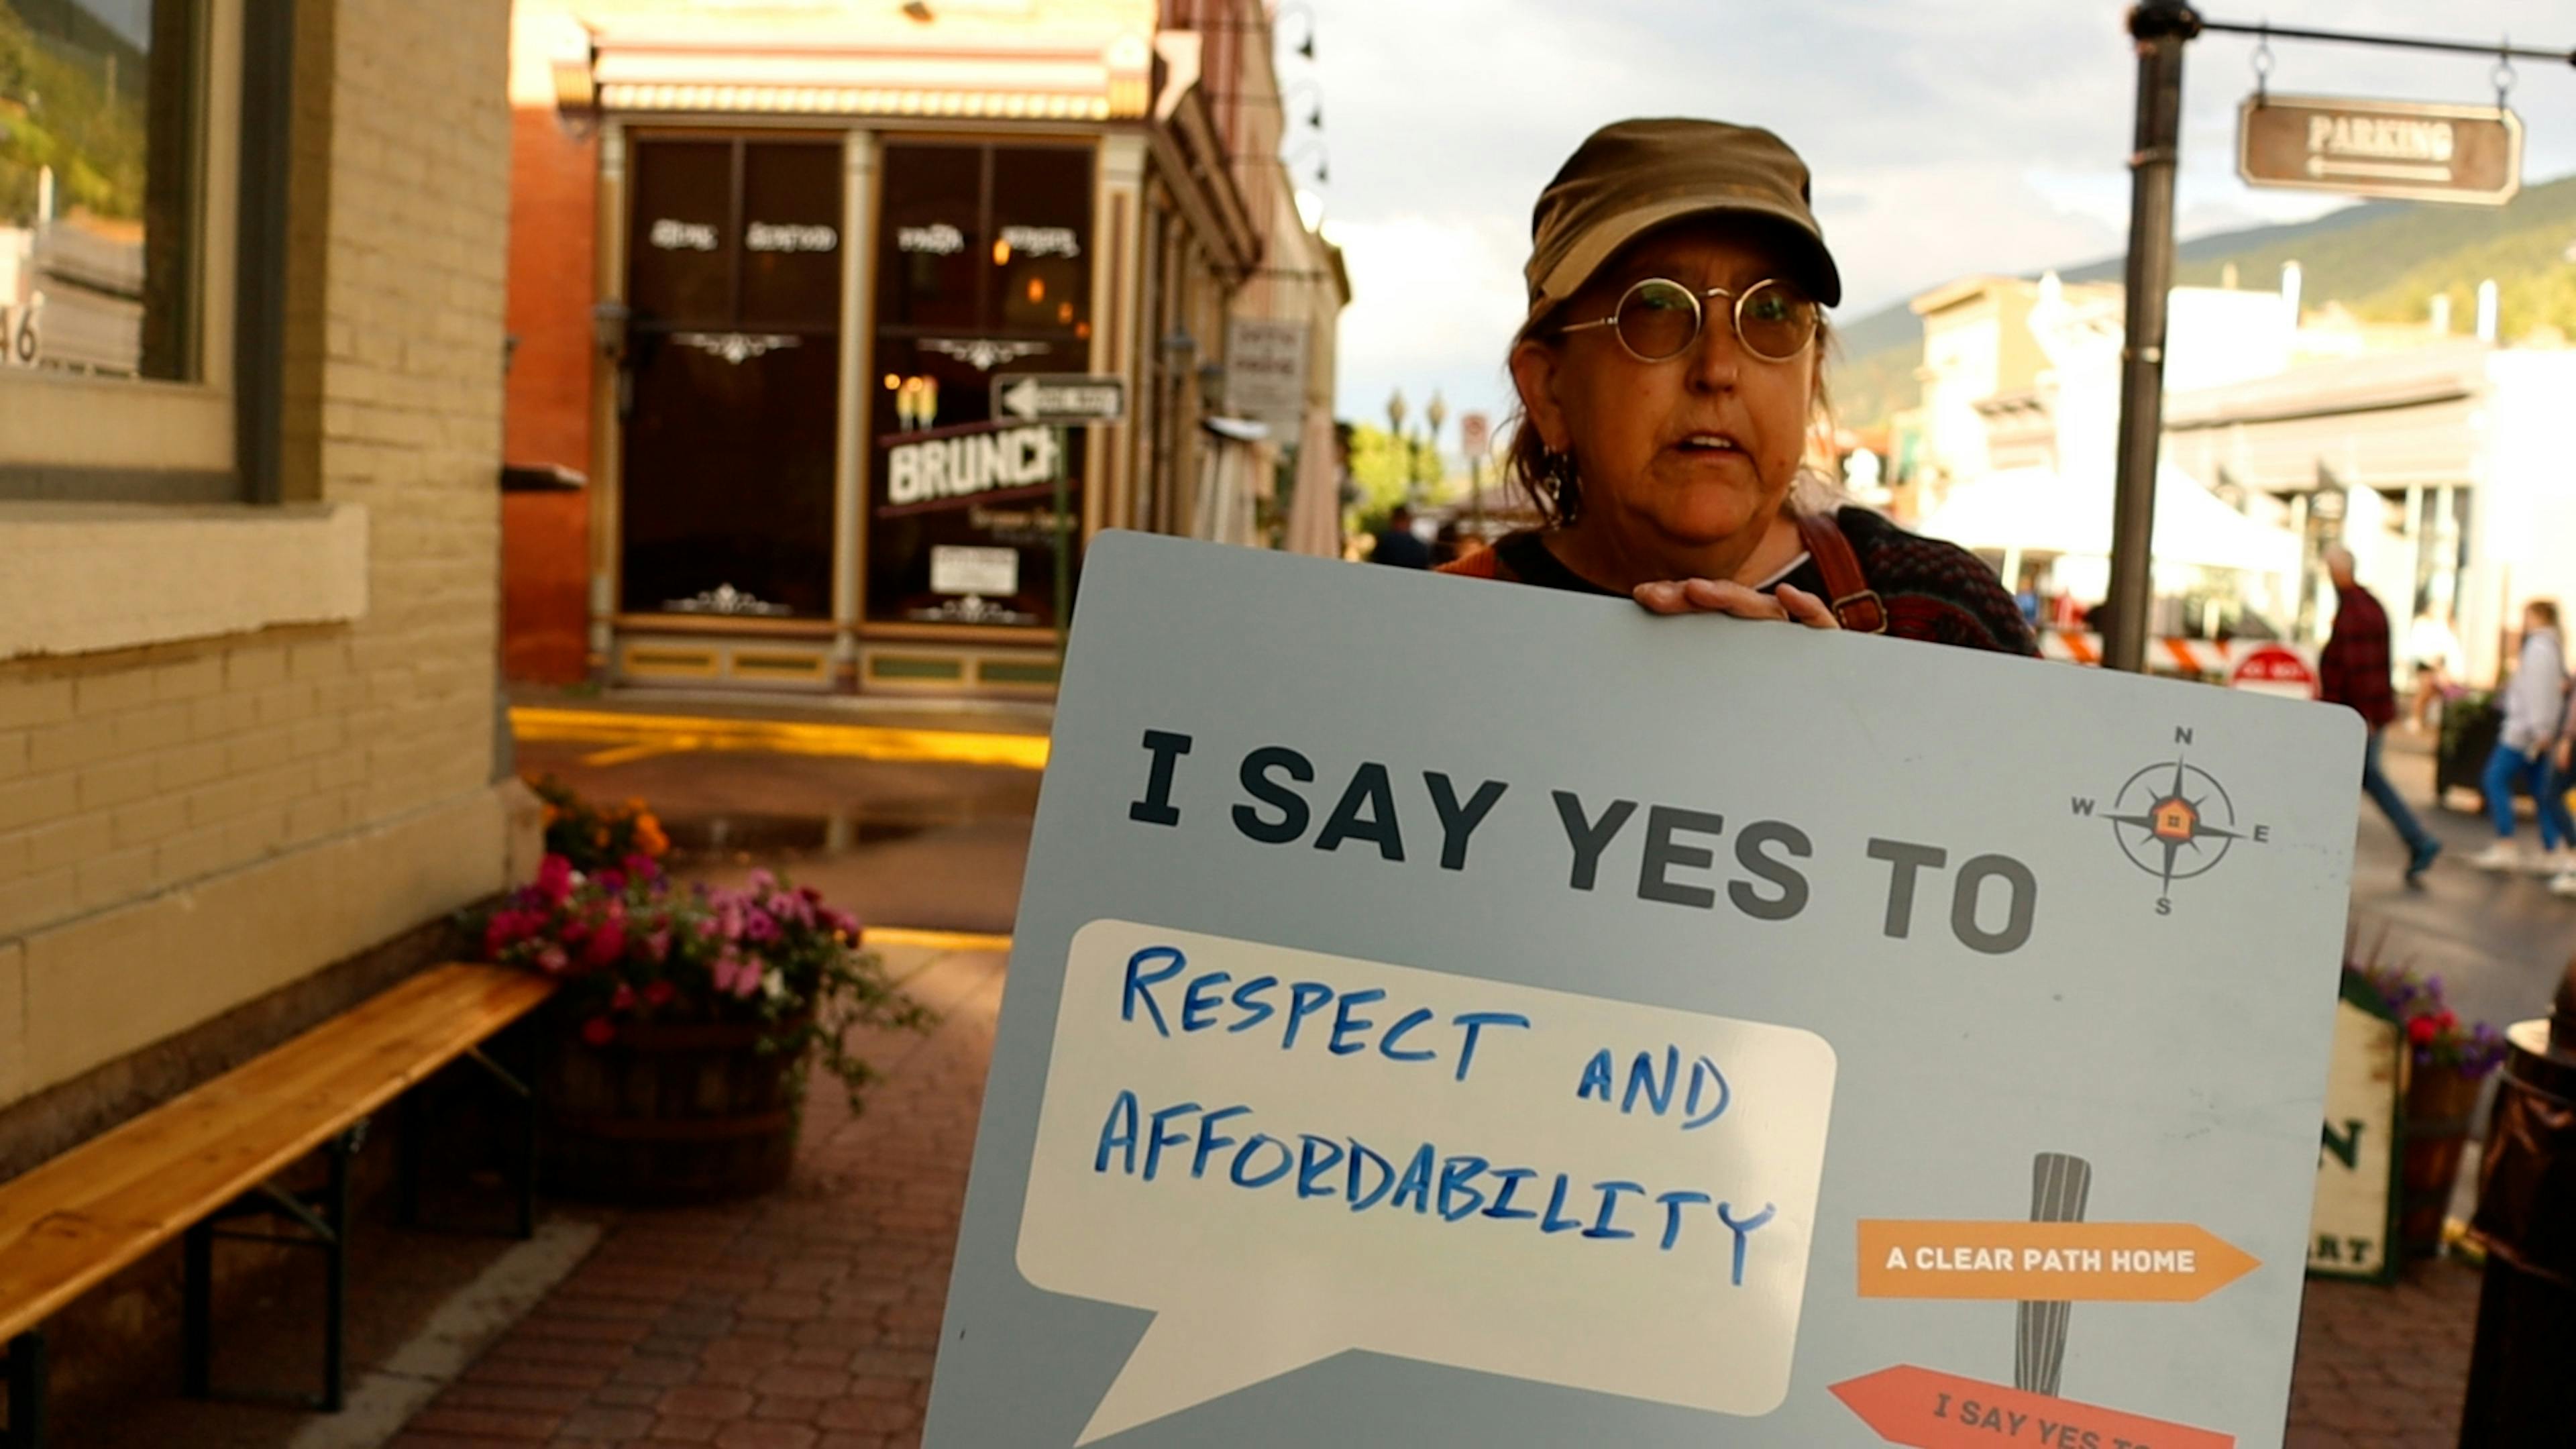 I Say Yes To... Respect and Affordability